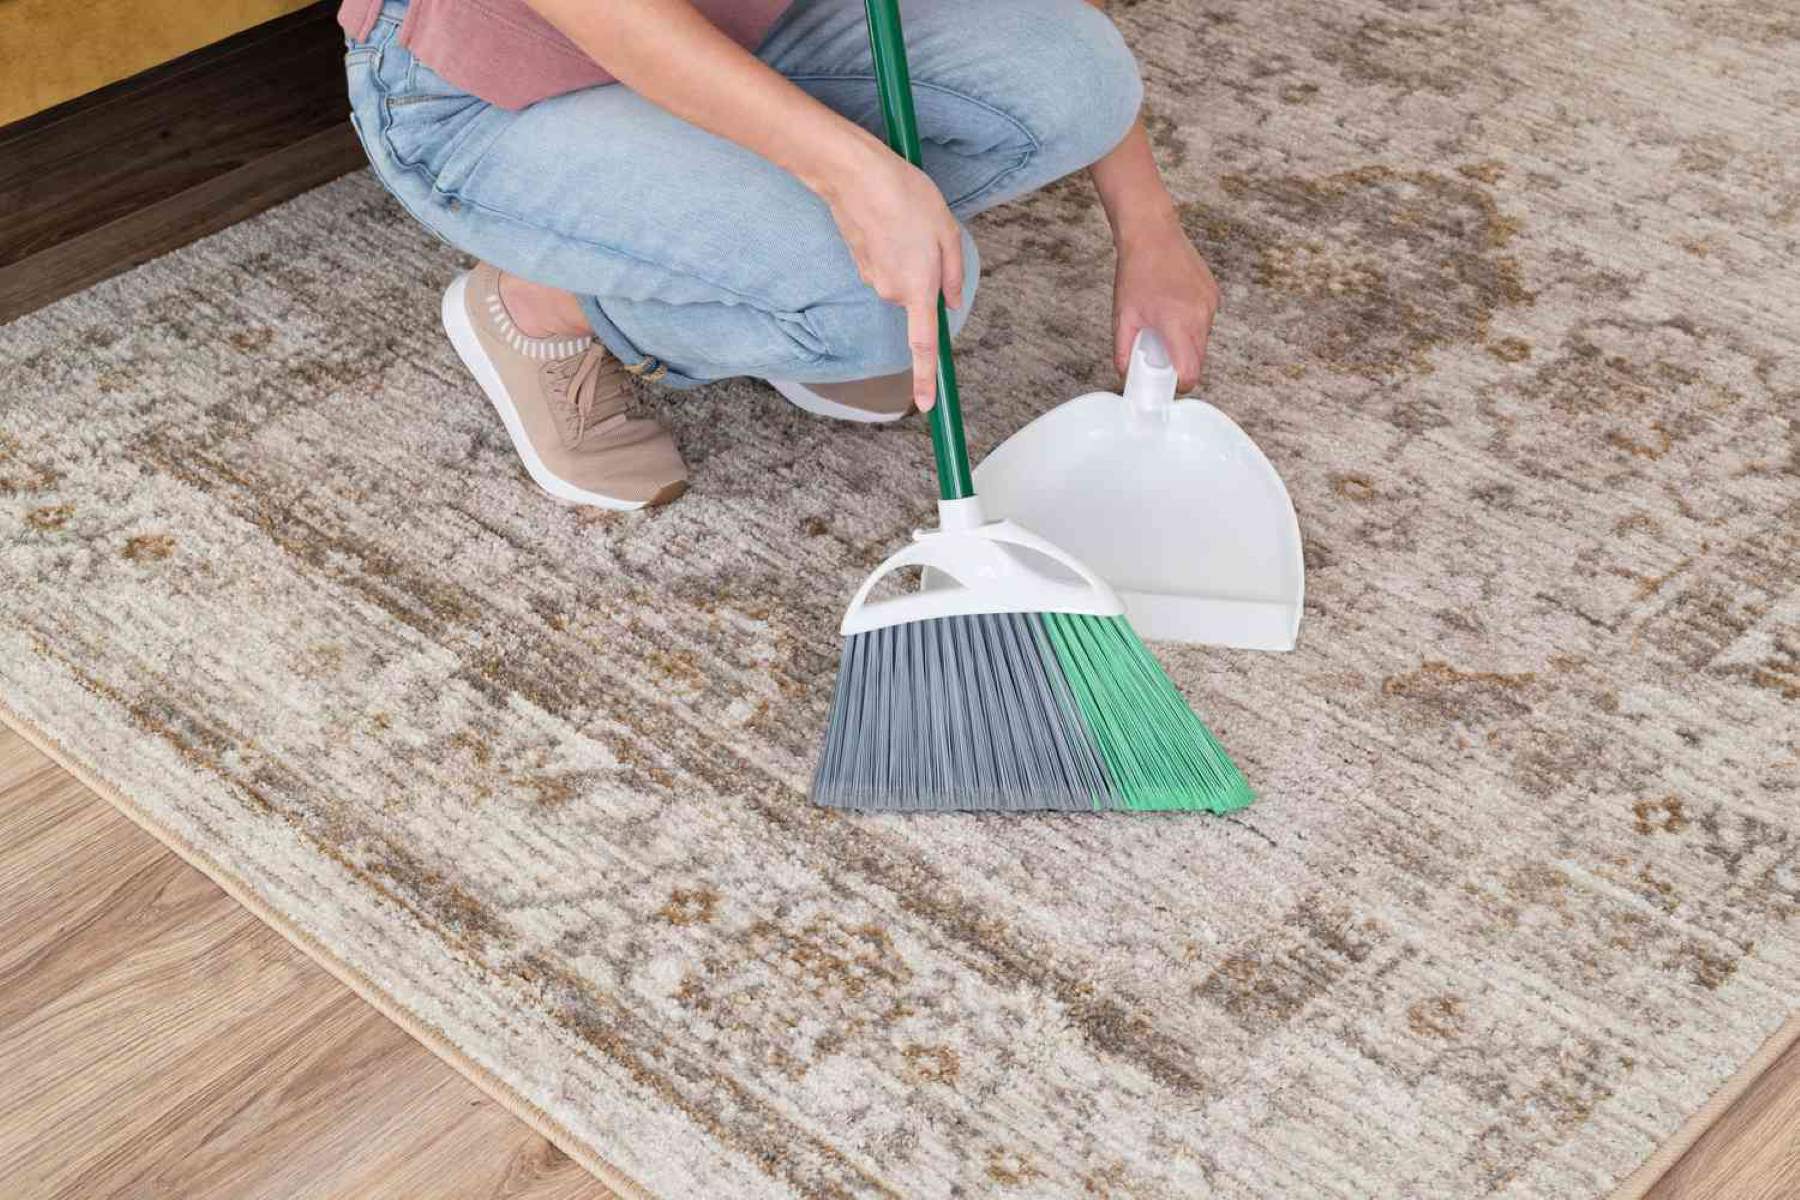 How To Clean Area Rugs At Home